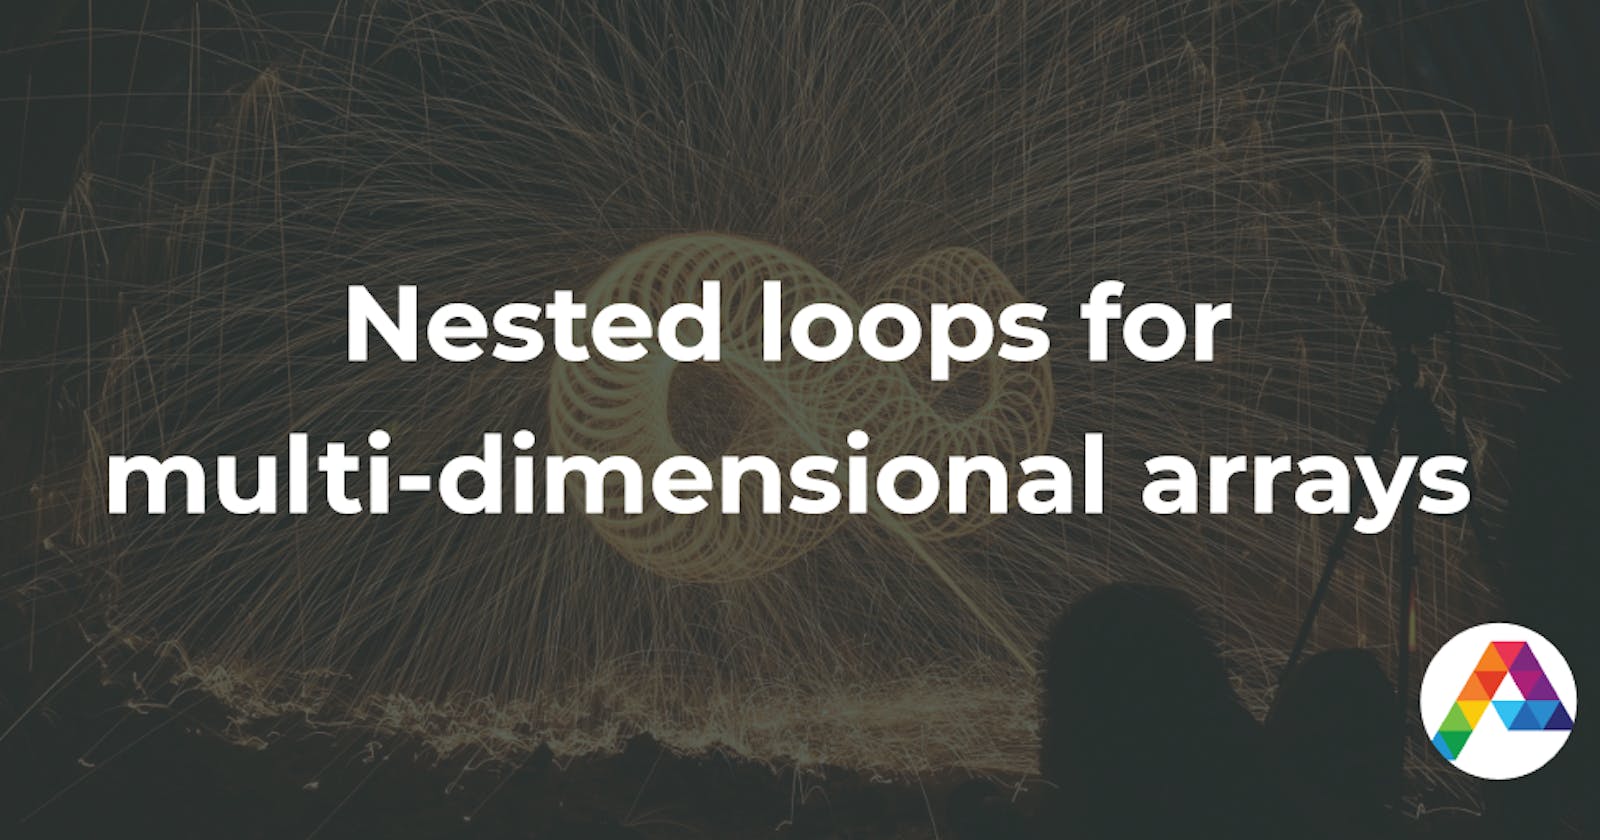 Nested loops for multi-dimensional arrays